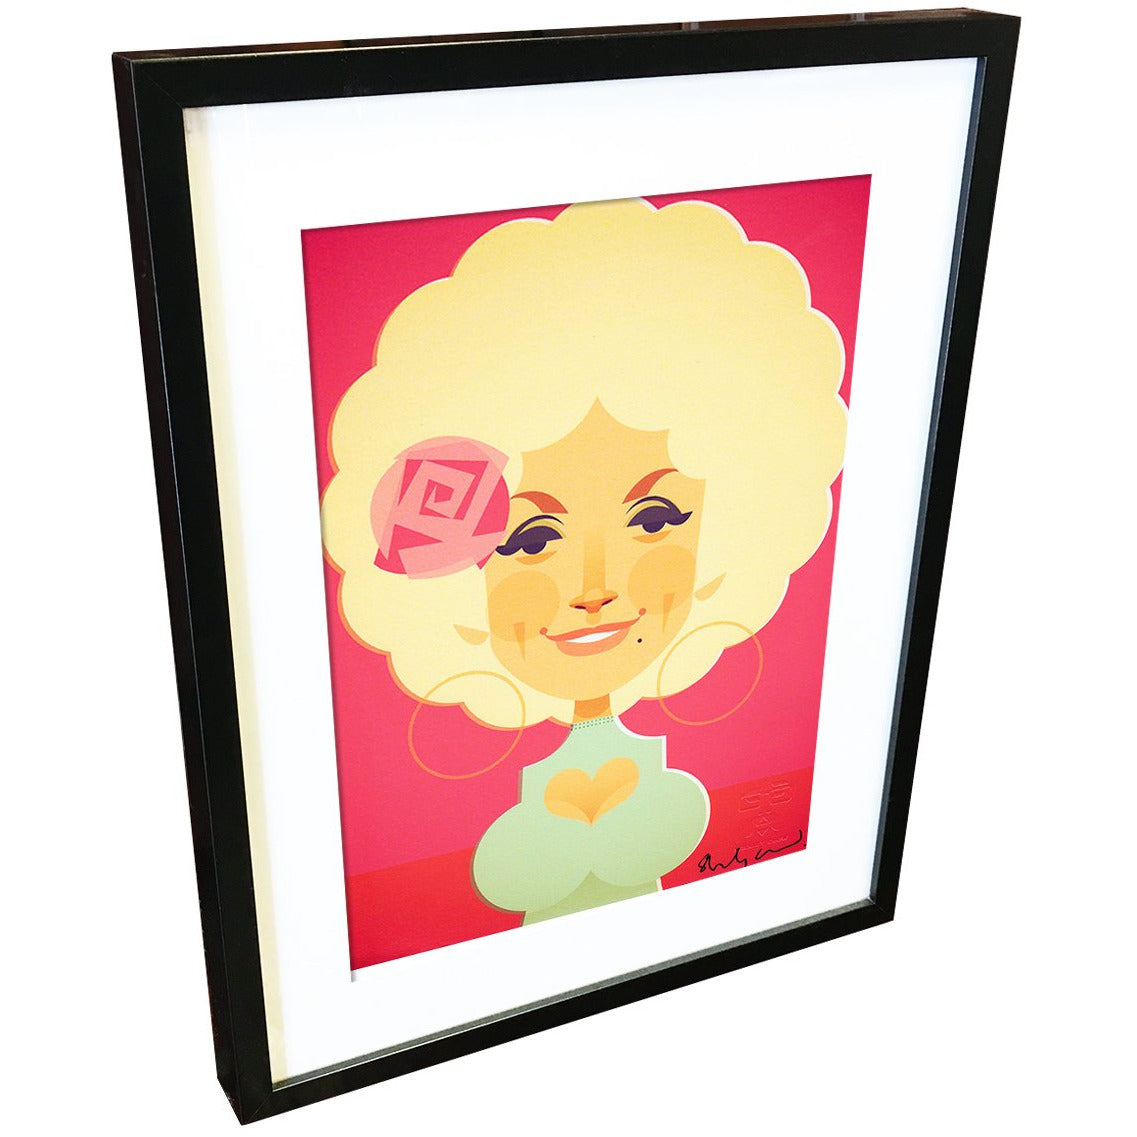 Dolly Parton (pink) by Stanley Chow - Signed and stamped fine art print - Egoiste Gallery - Art Gallery in Manchester City Centre